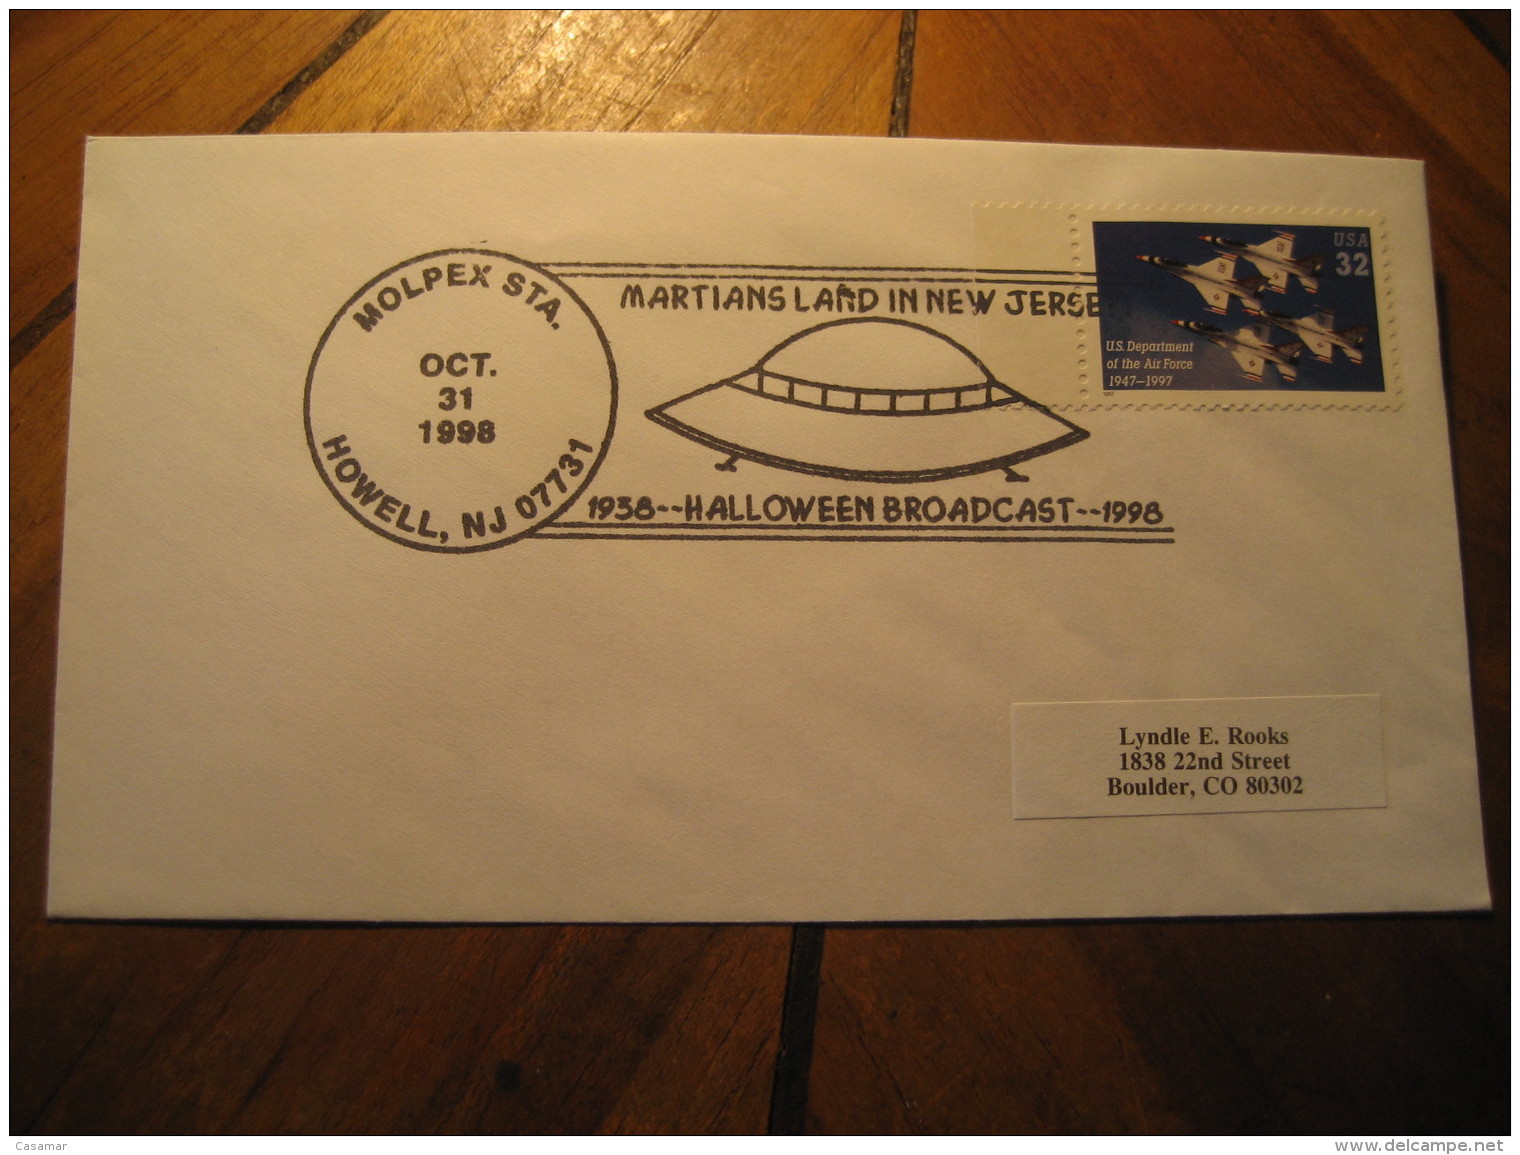 MARTIANS LAND IN NEW JERSEY Halloween Broadcast UFO OVNI Howell 1998 Cancel Cover USA Space Spatial - United States